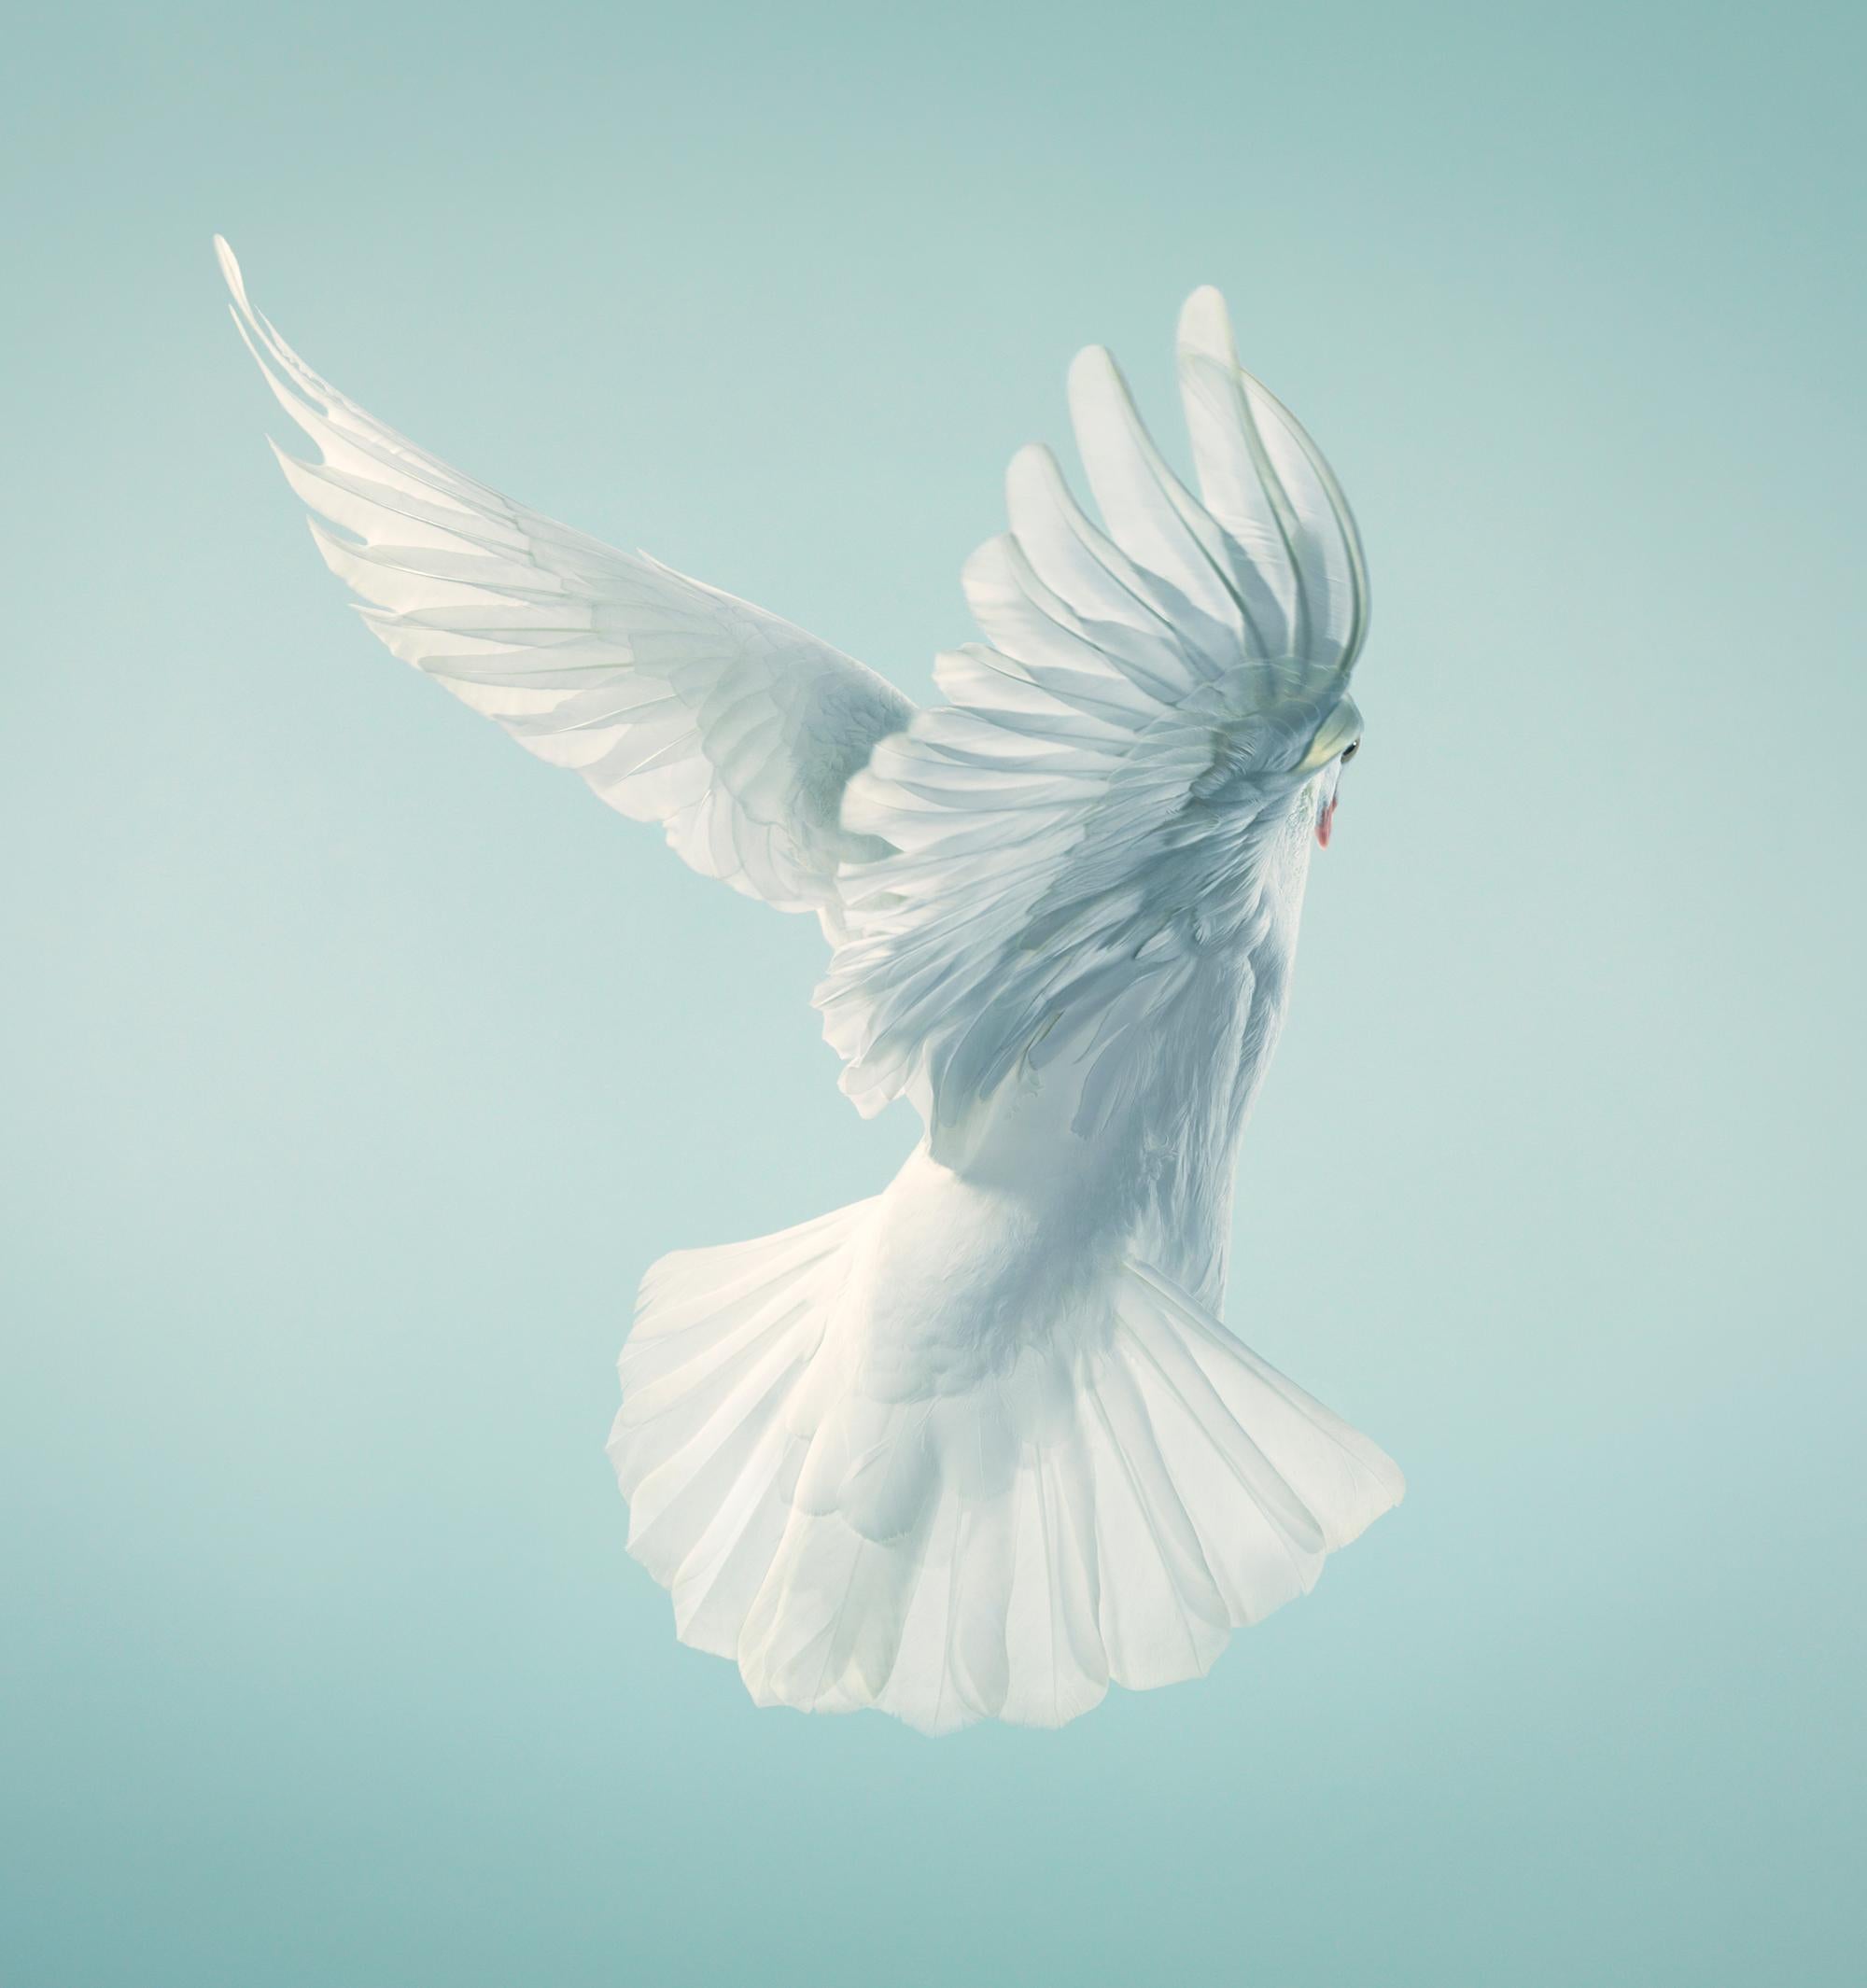 Flying Facing - Contemporary British Art, Animal Photography, Doves, Tim Flach